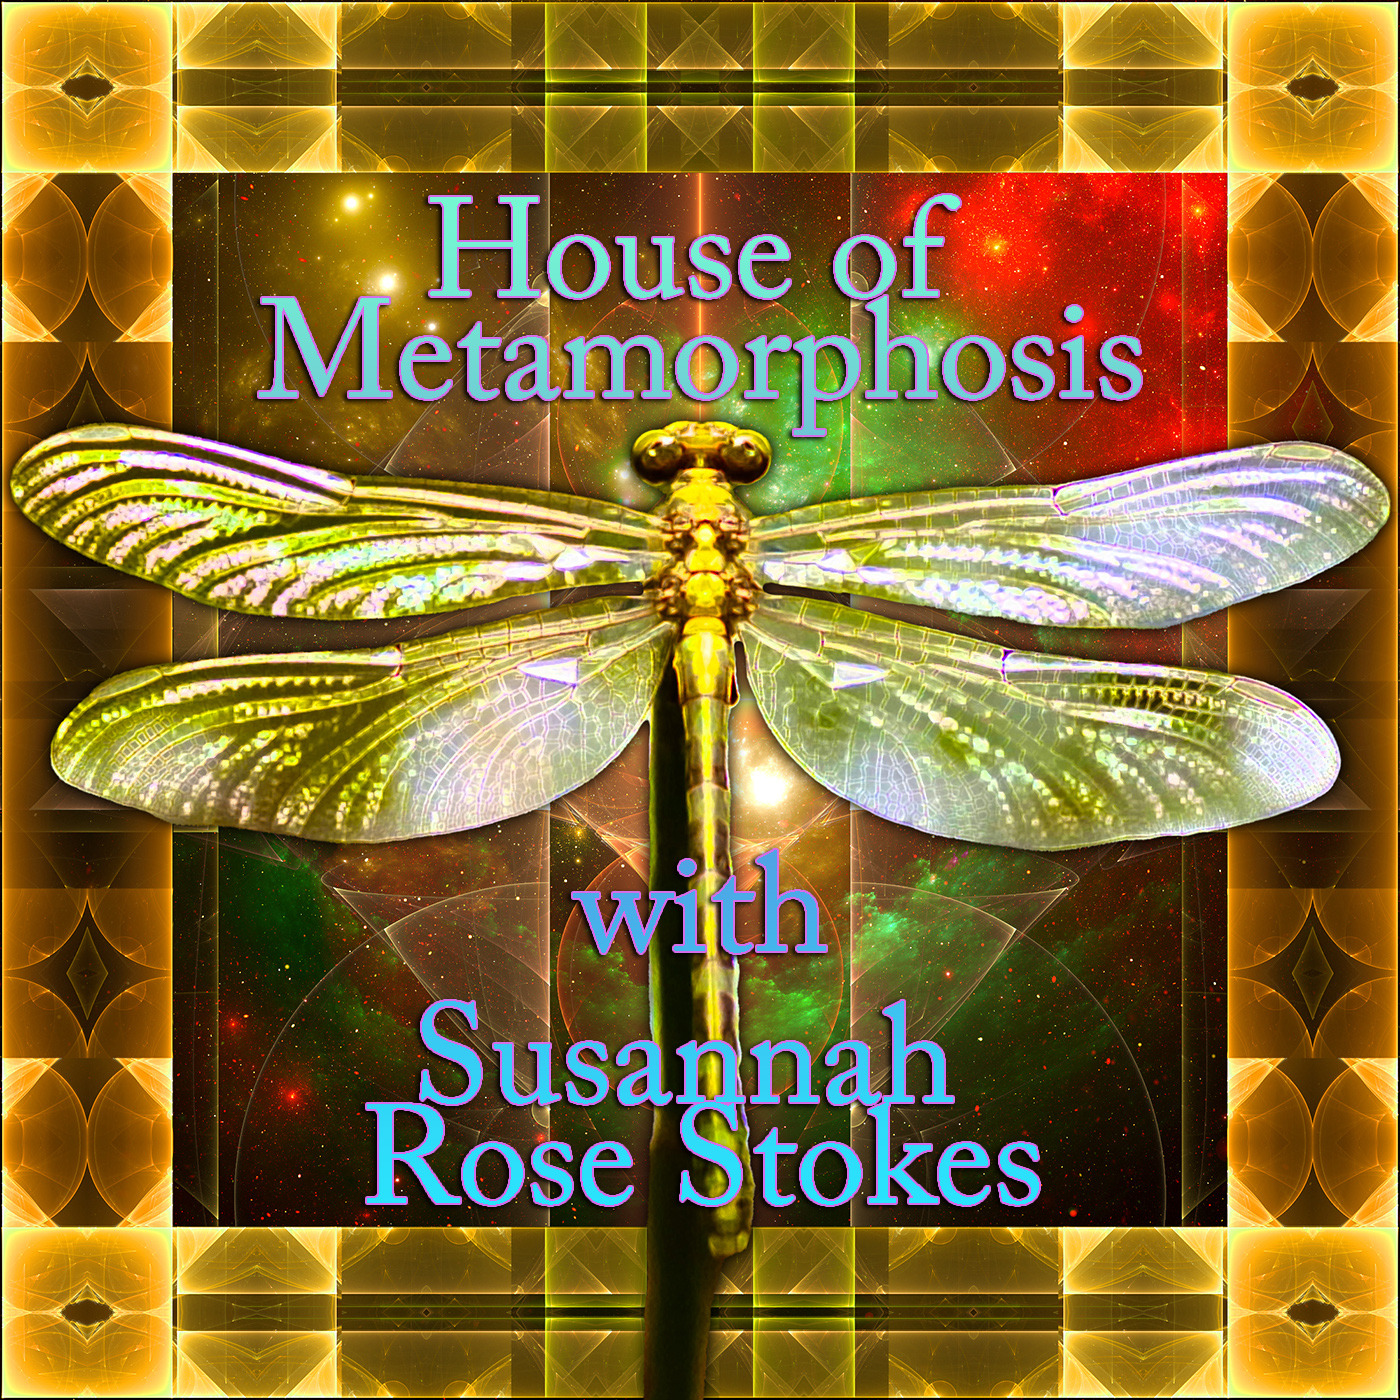 Episode 217: House of Metamorphosis with Susannah Rose Stokes